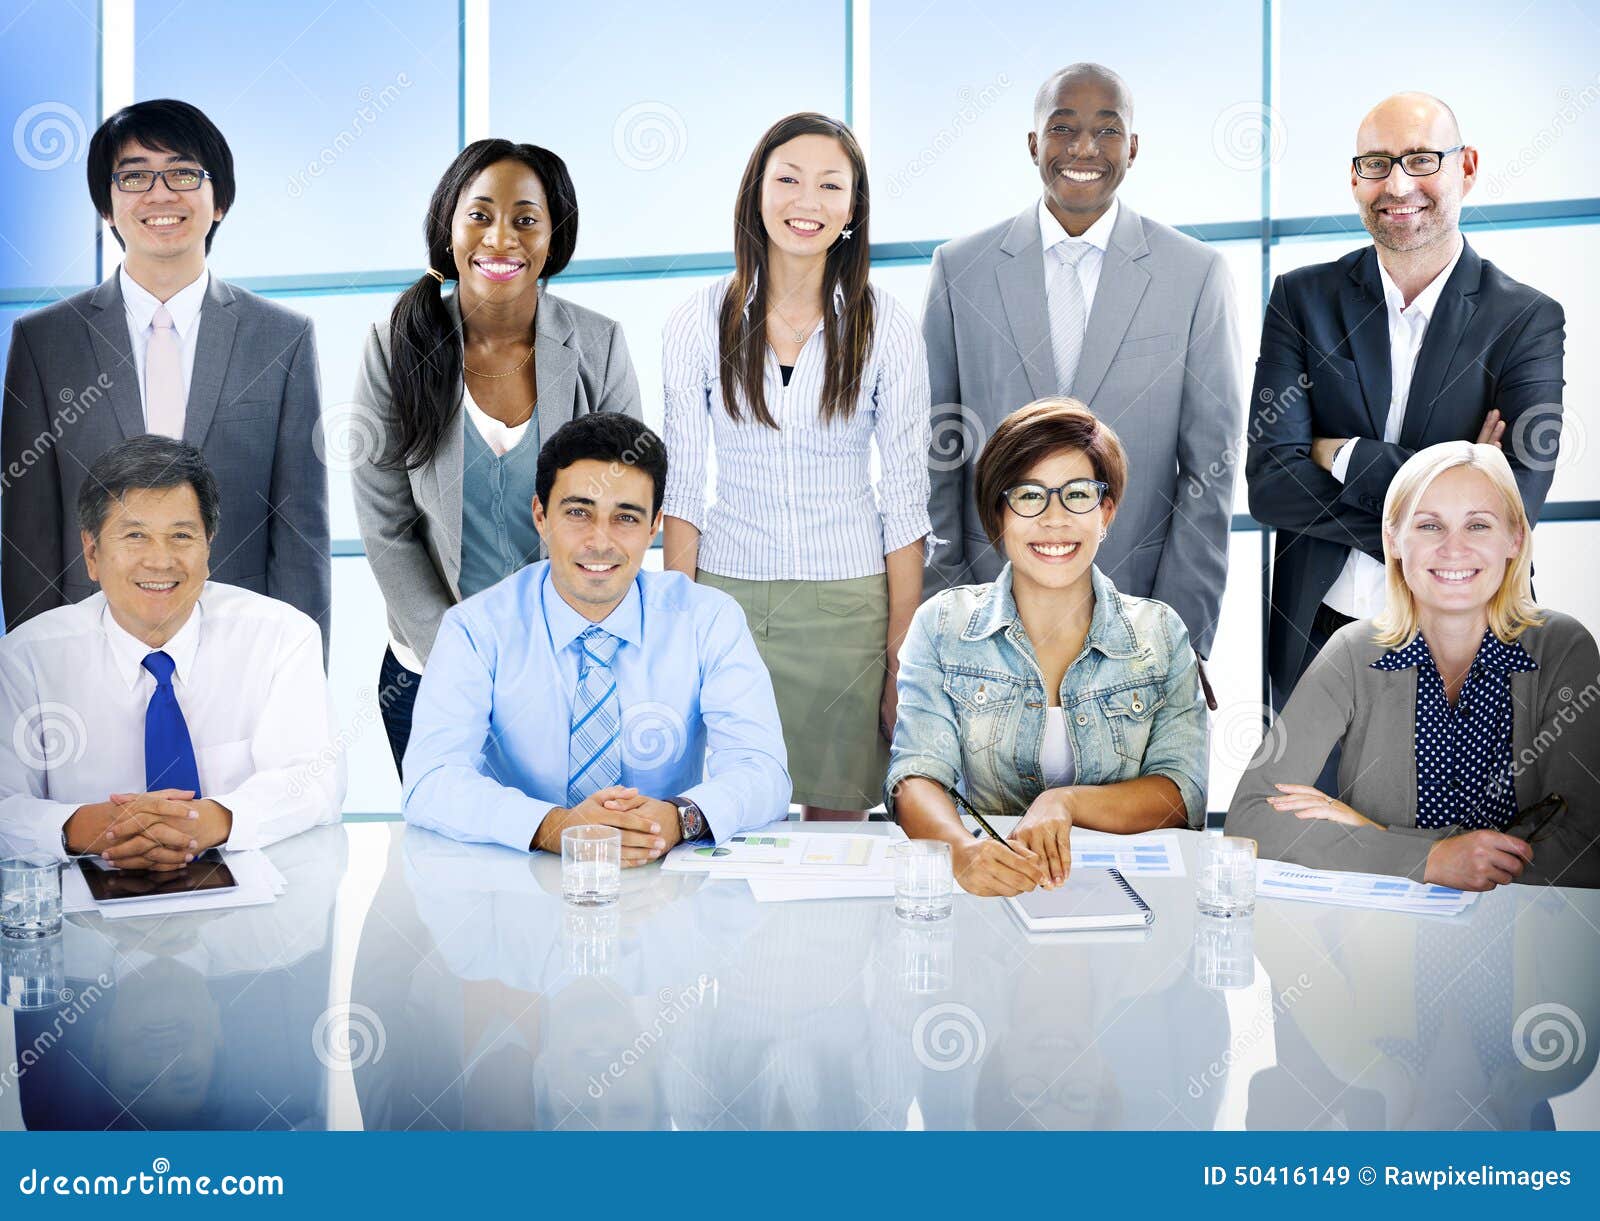 business people diversity team corporate professional concept